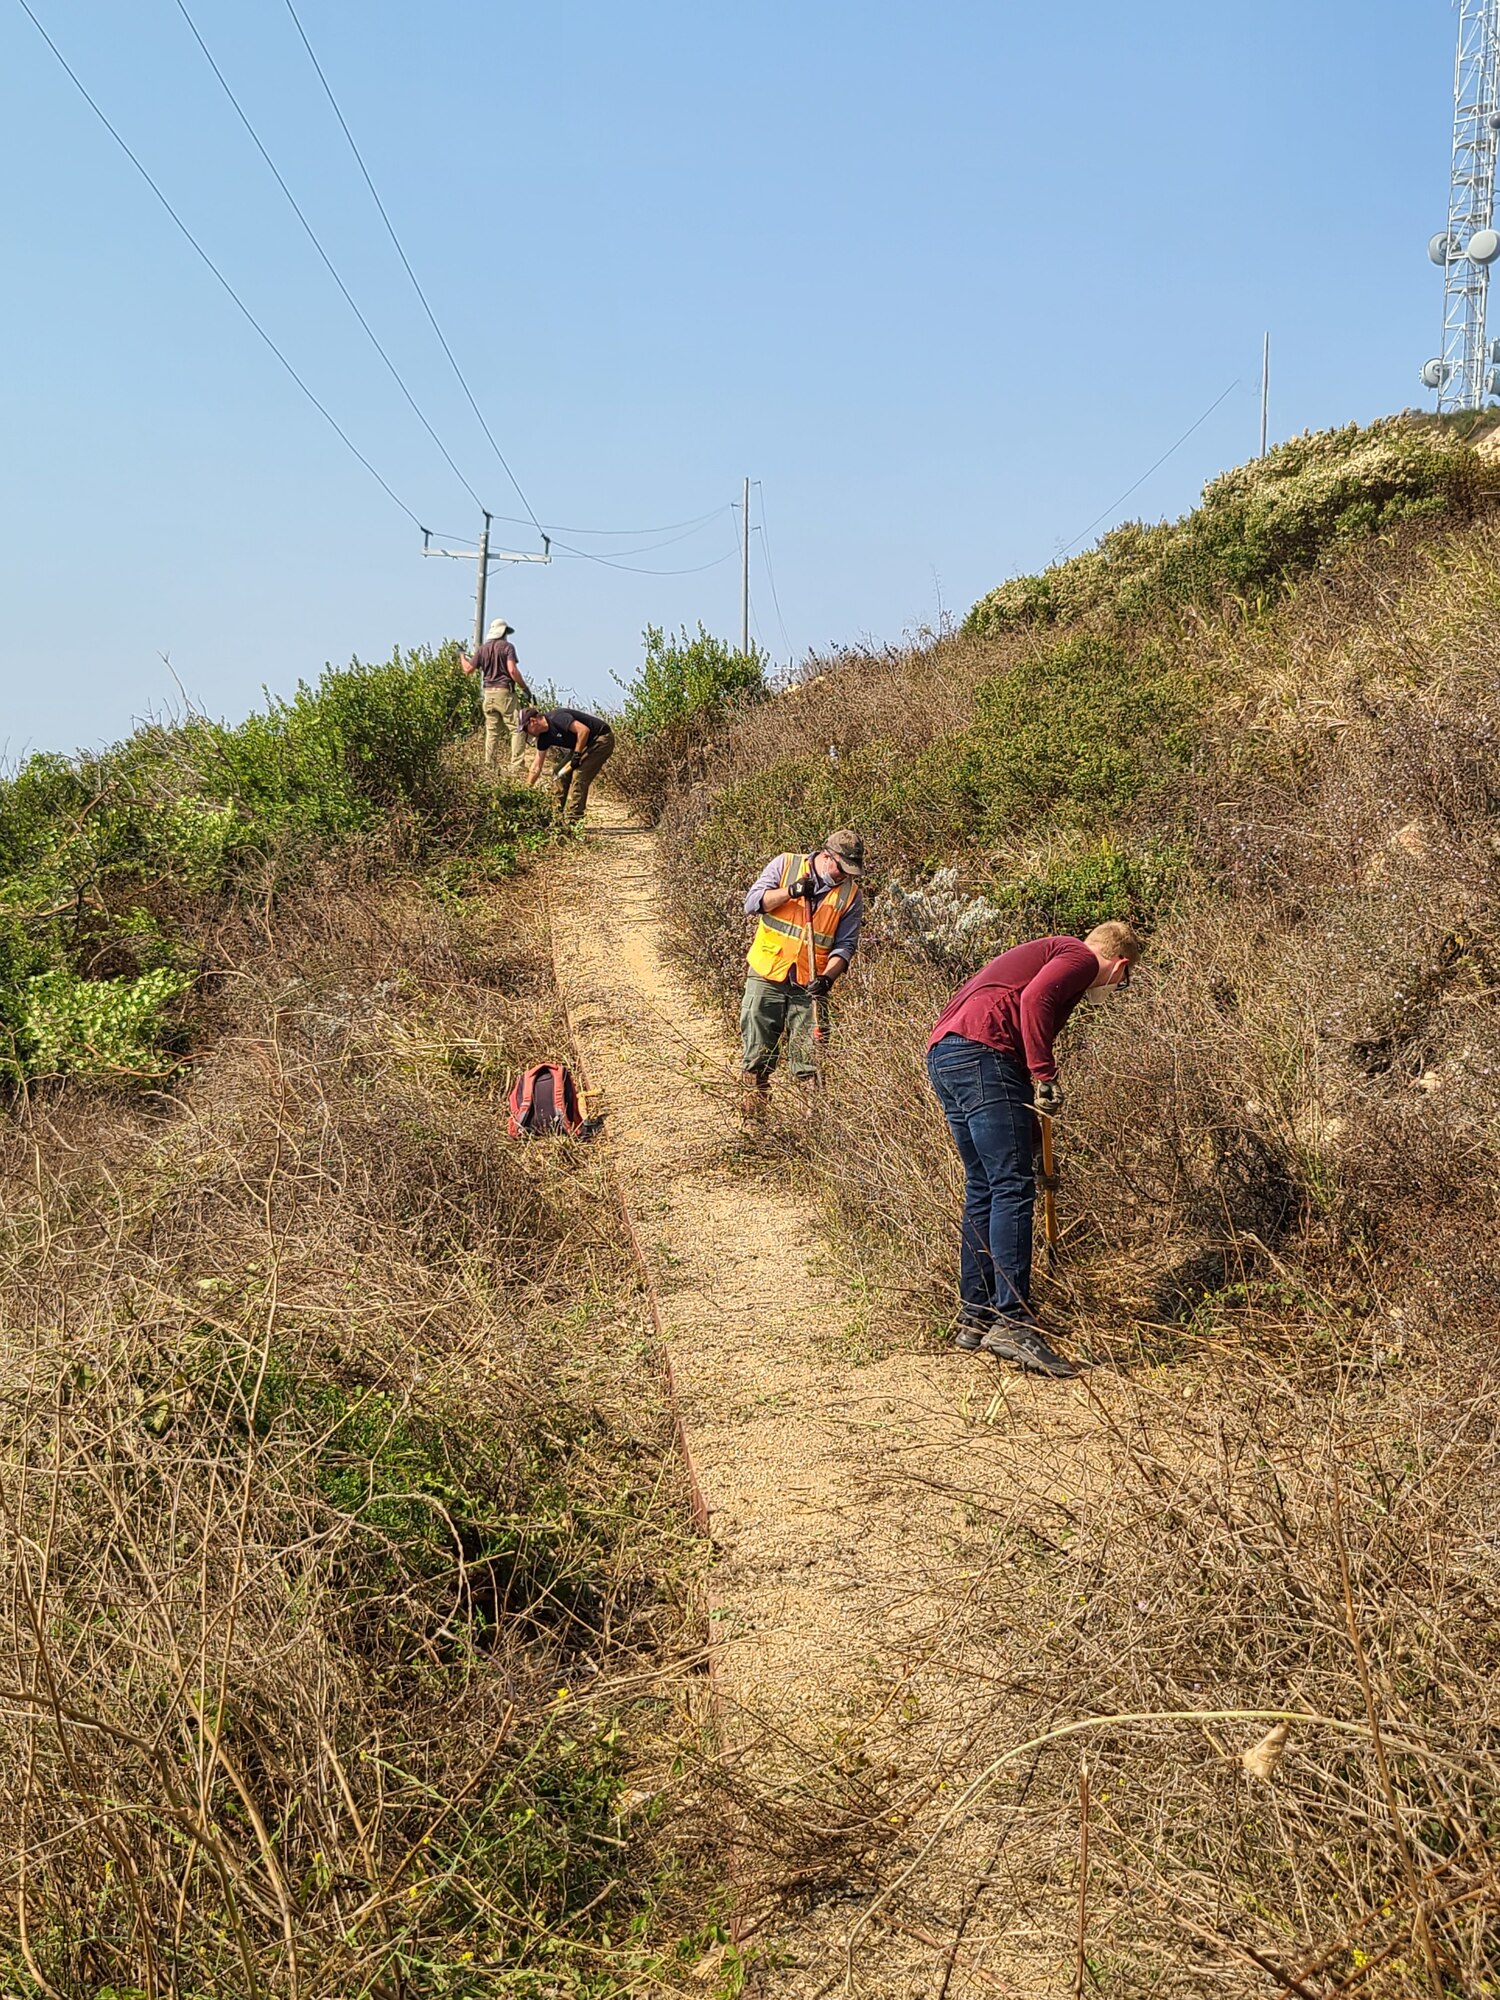 Volunteers clear vegetation at the Honda Ridge Rock Art Site trail during a National Public Lands Day cultural resource effort at Vandenberg Air Force Base, Calif. Seven volunteers came together to clear the path to the historic site to make it more accessible for viewers. The effort was part of the month-long list of volunteer events across base to include beach cleanups, invasive plant removal and a Boat House cleanup effort in support of National Public Lands Day.  (Courtesy photo)